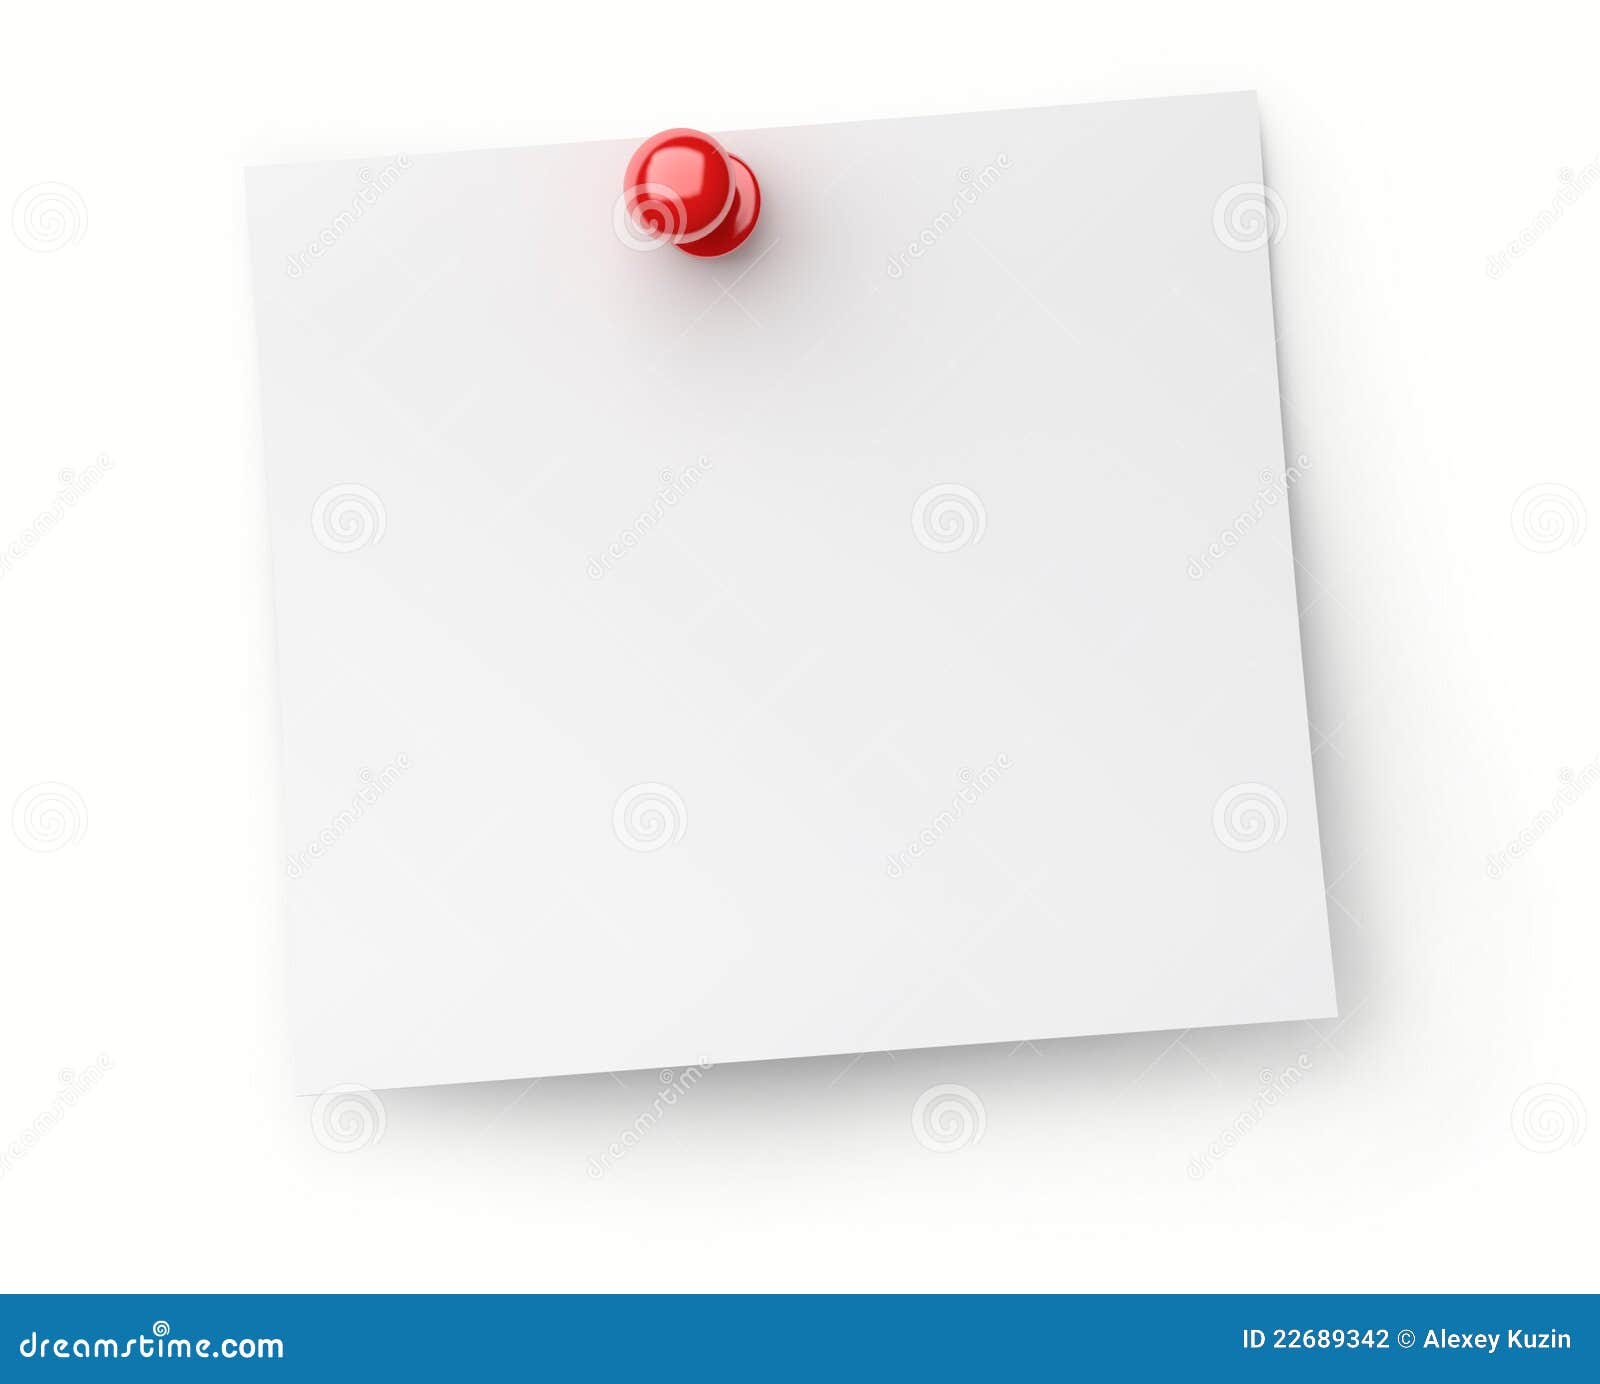 Note Paper With Red Push Pin Stock Photography Image 22689342